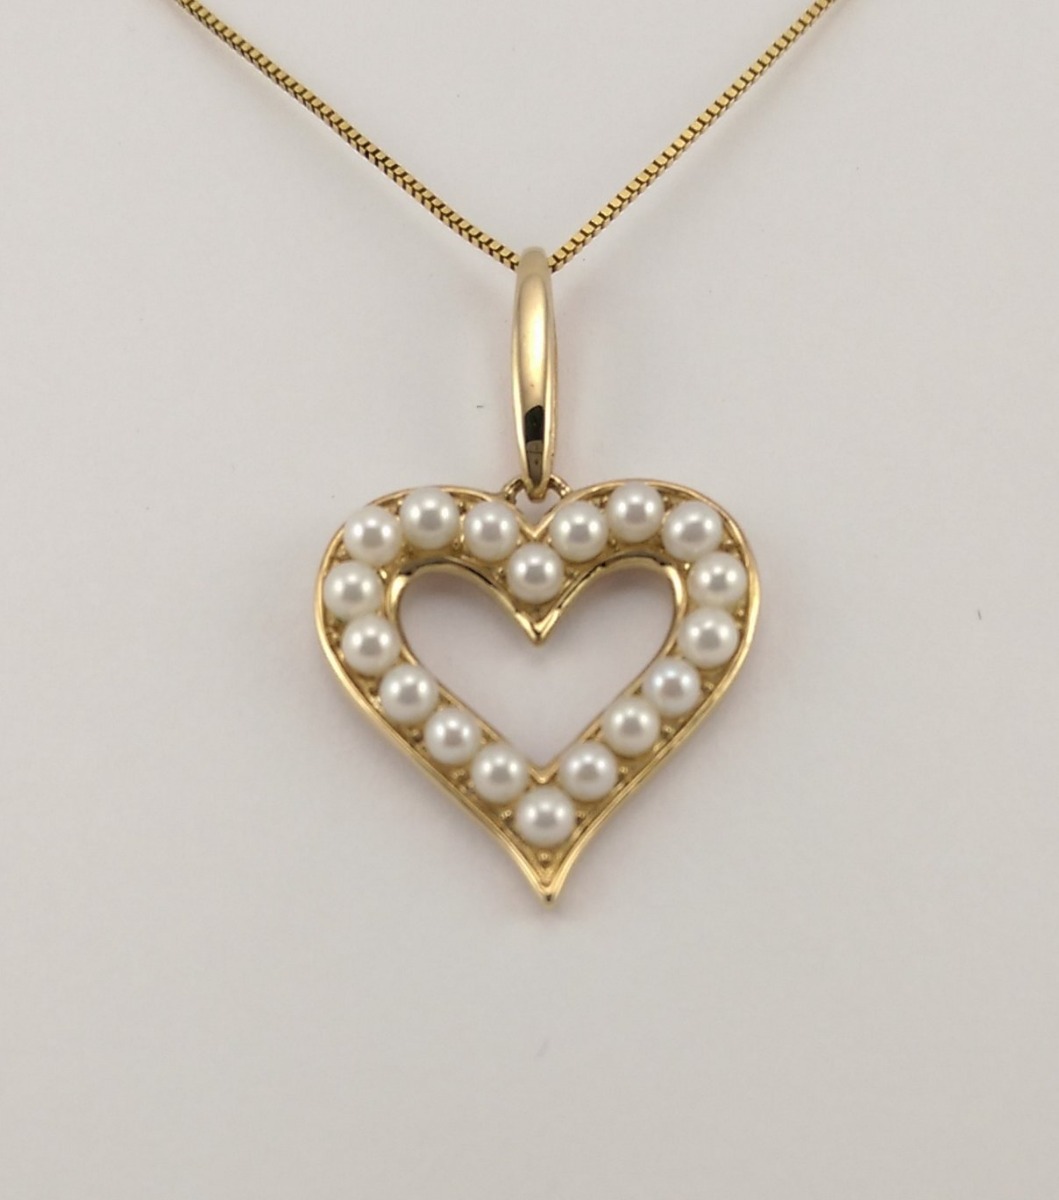 9ct Yellow Gold Heart Shaped Cultured Pearl Pendant on Chain-0